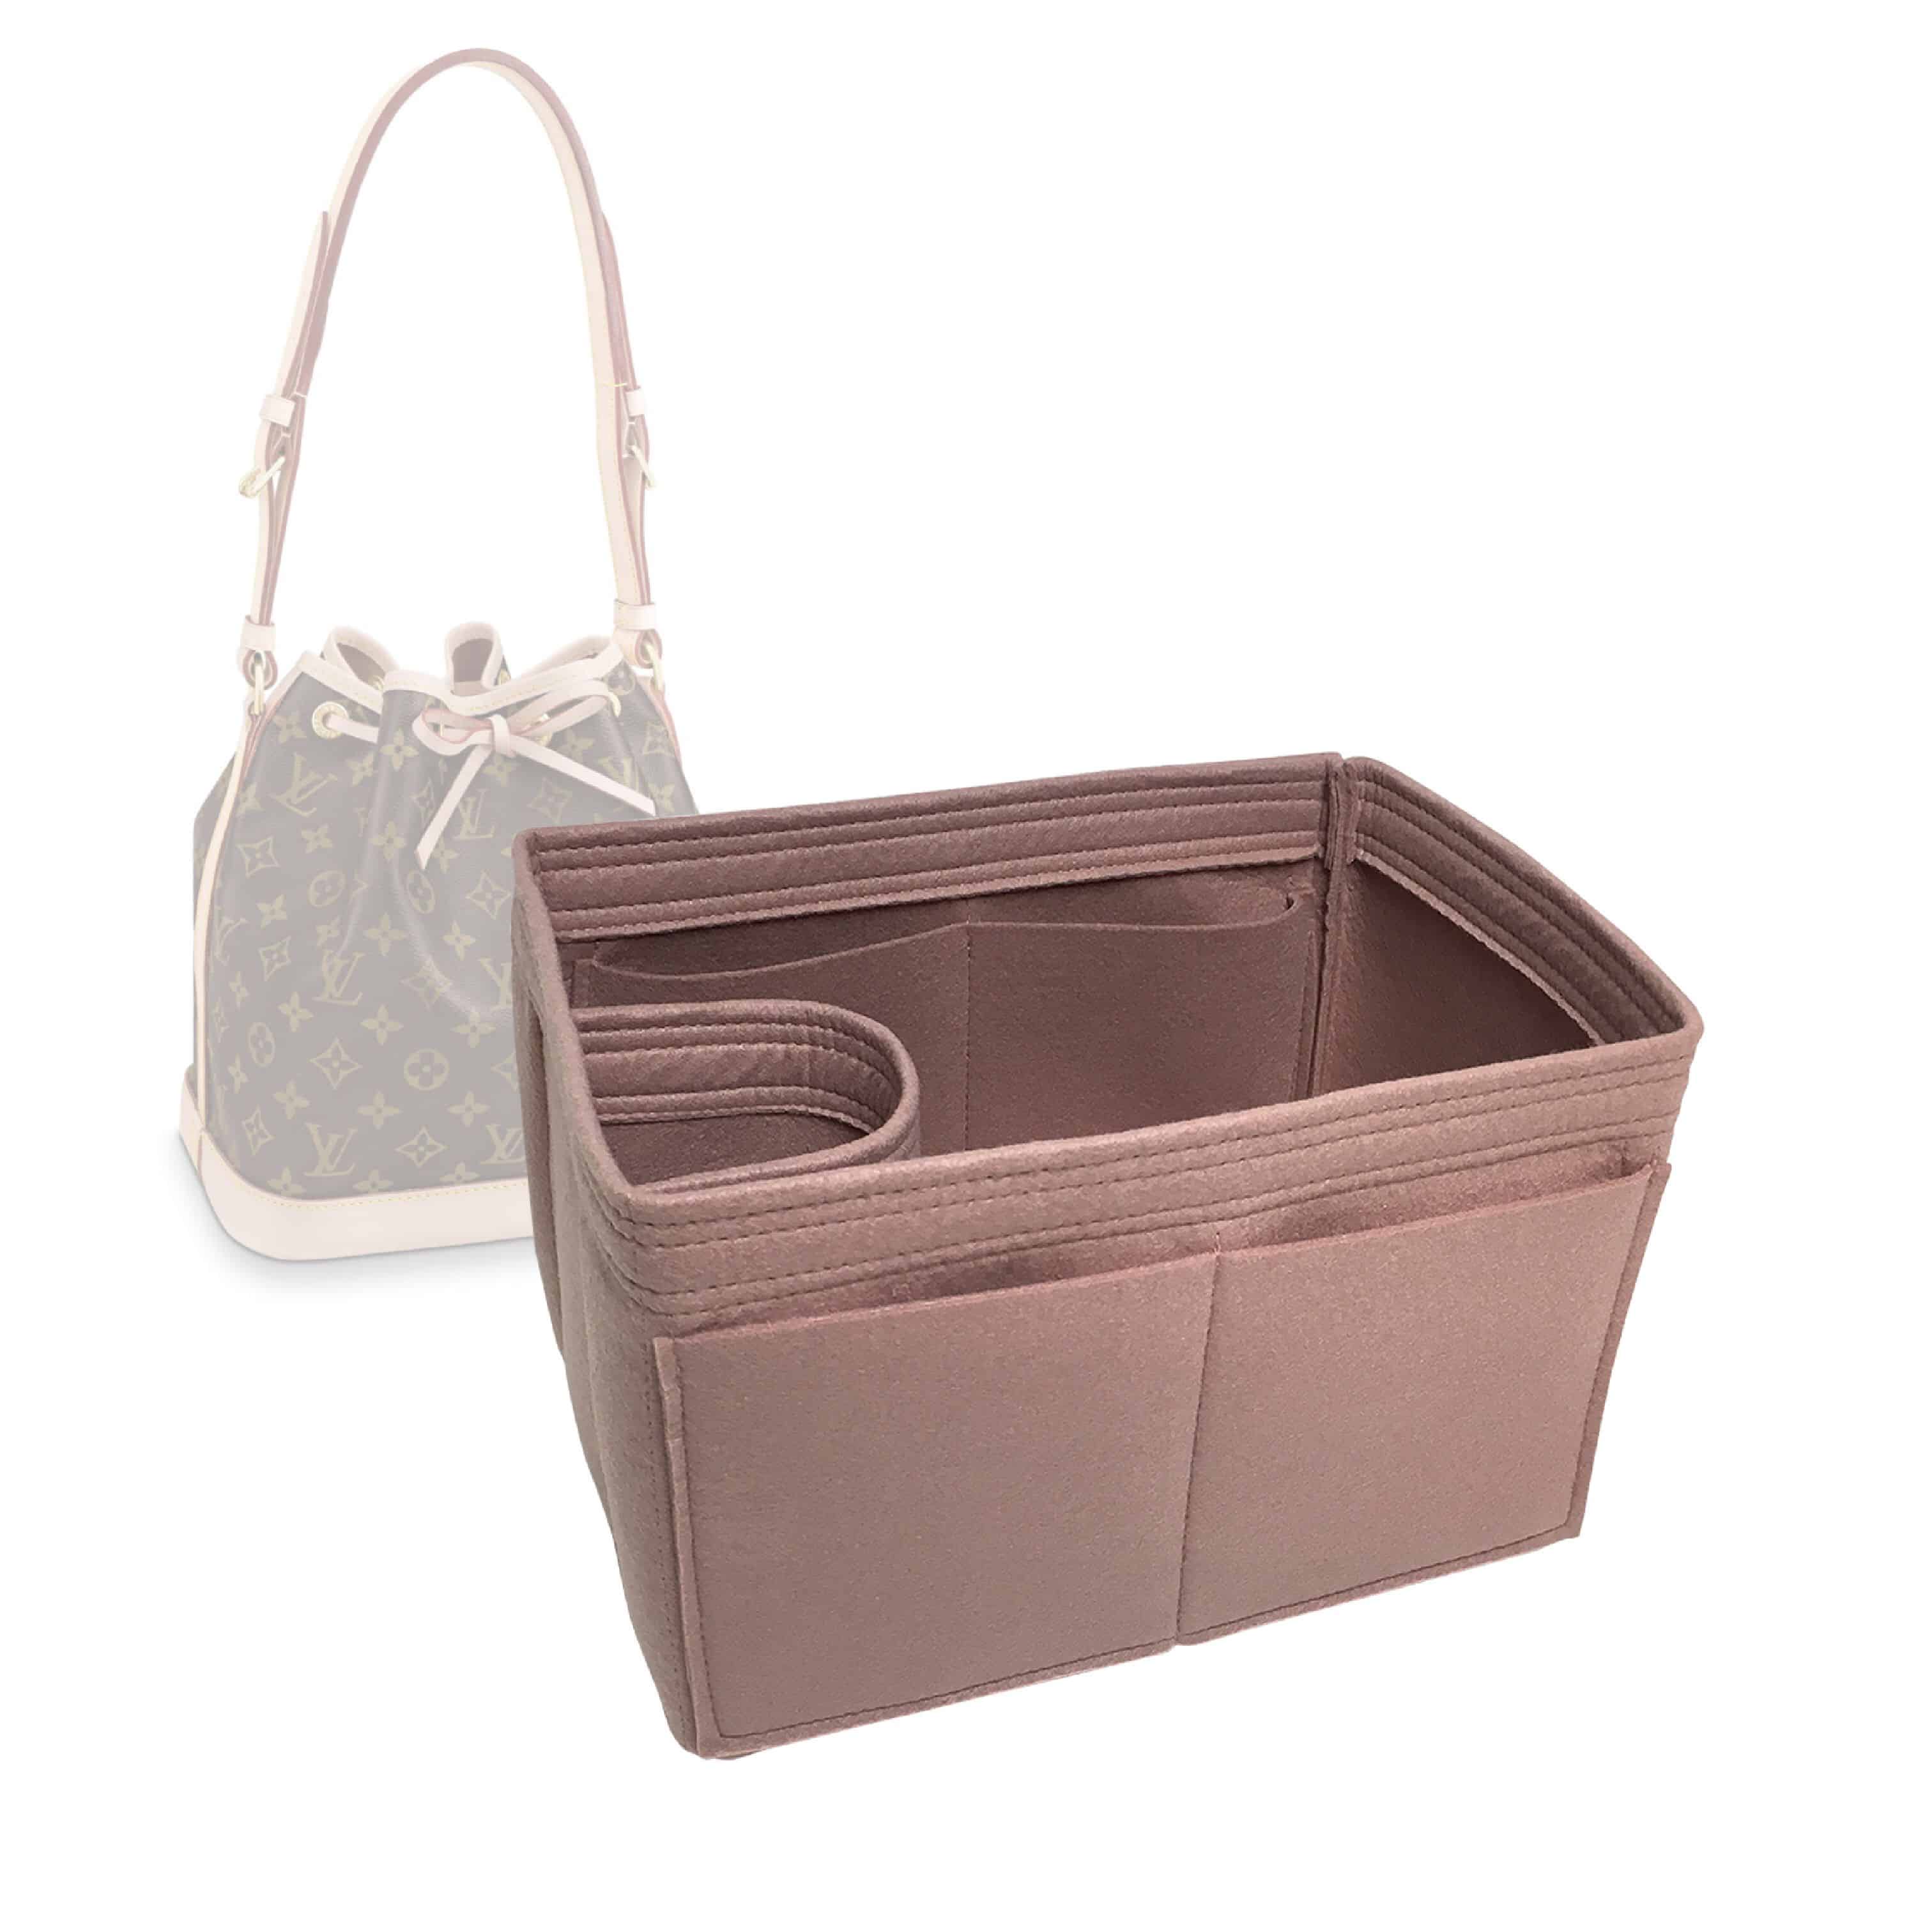 Bag and Purse Organizer with Basic Style for Petit NOE, NOE and NOE BB